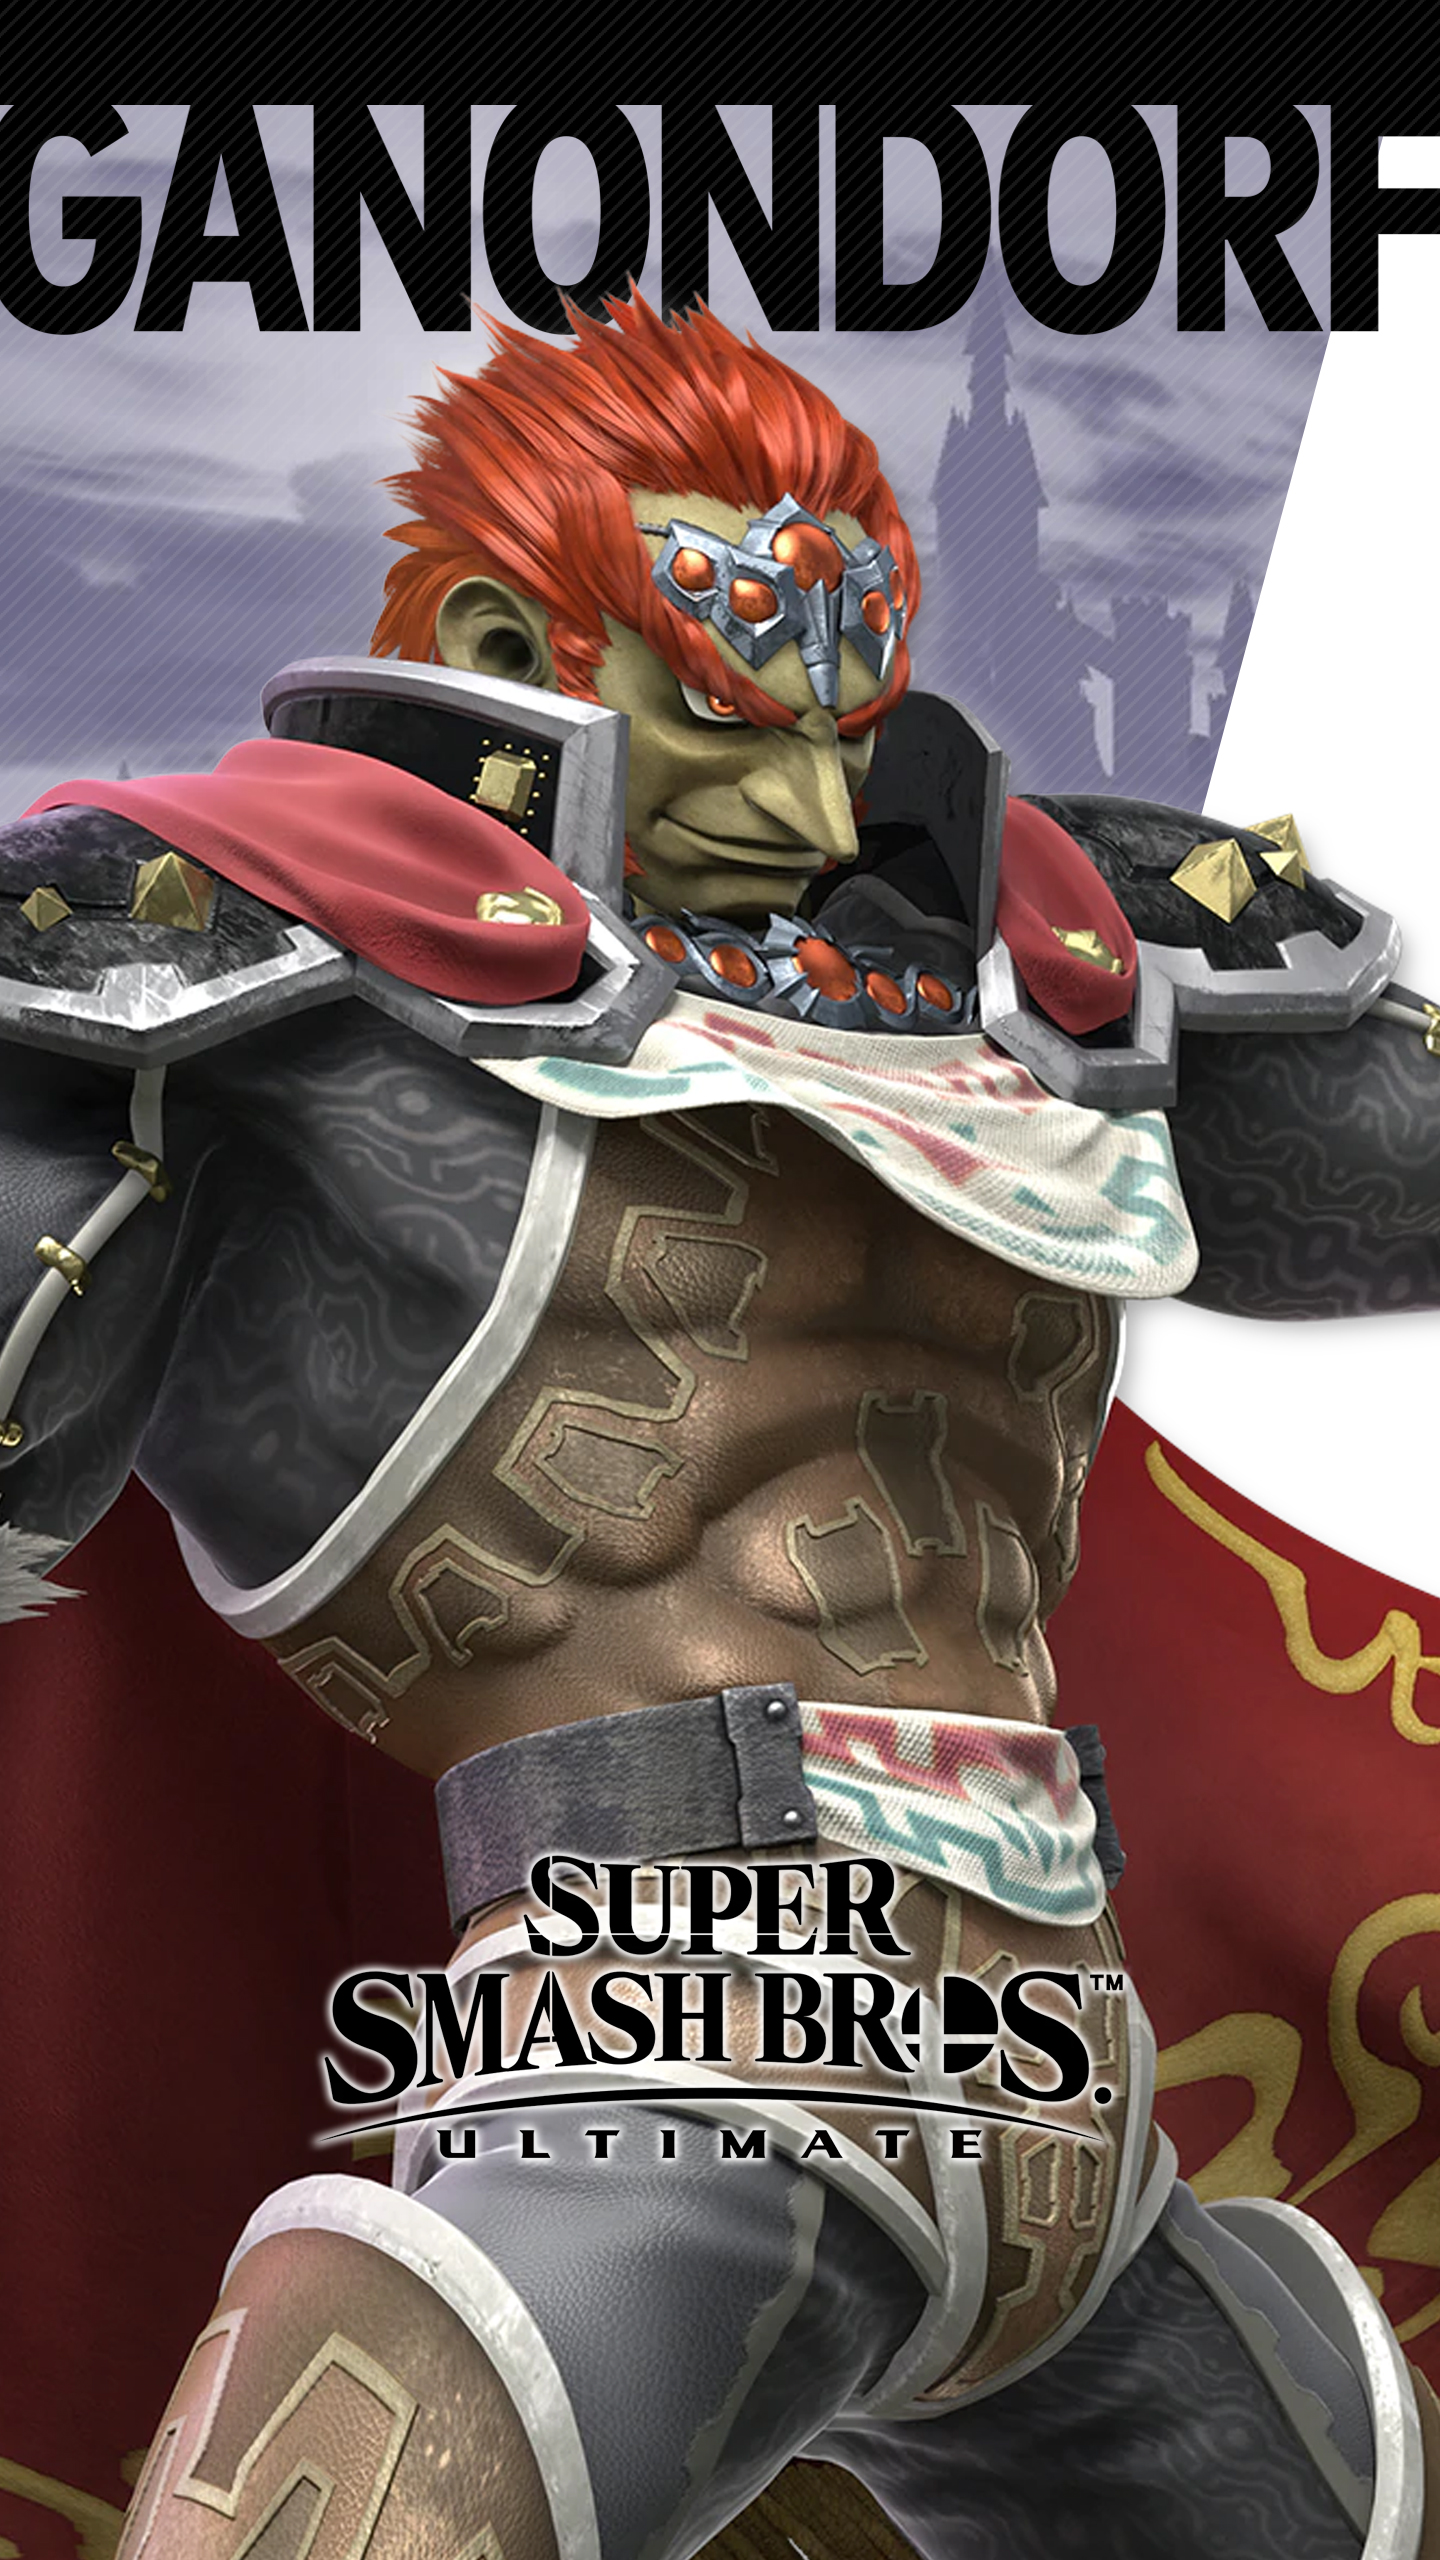 Super Smash Bros Ultimate Ganondorf Wallpapers | Cat with Monocle